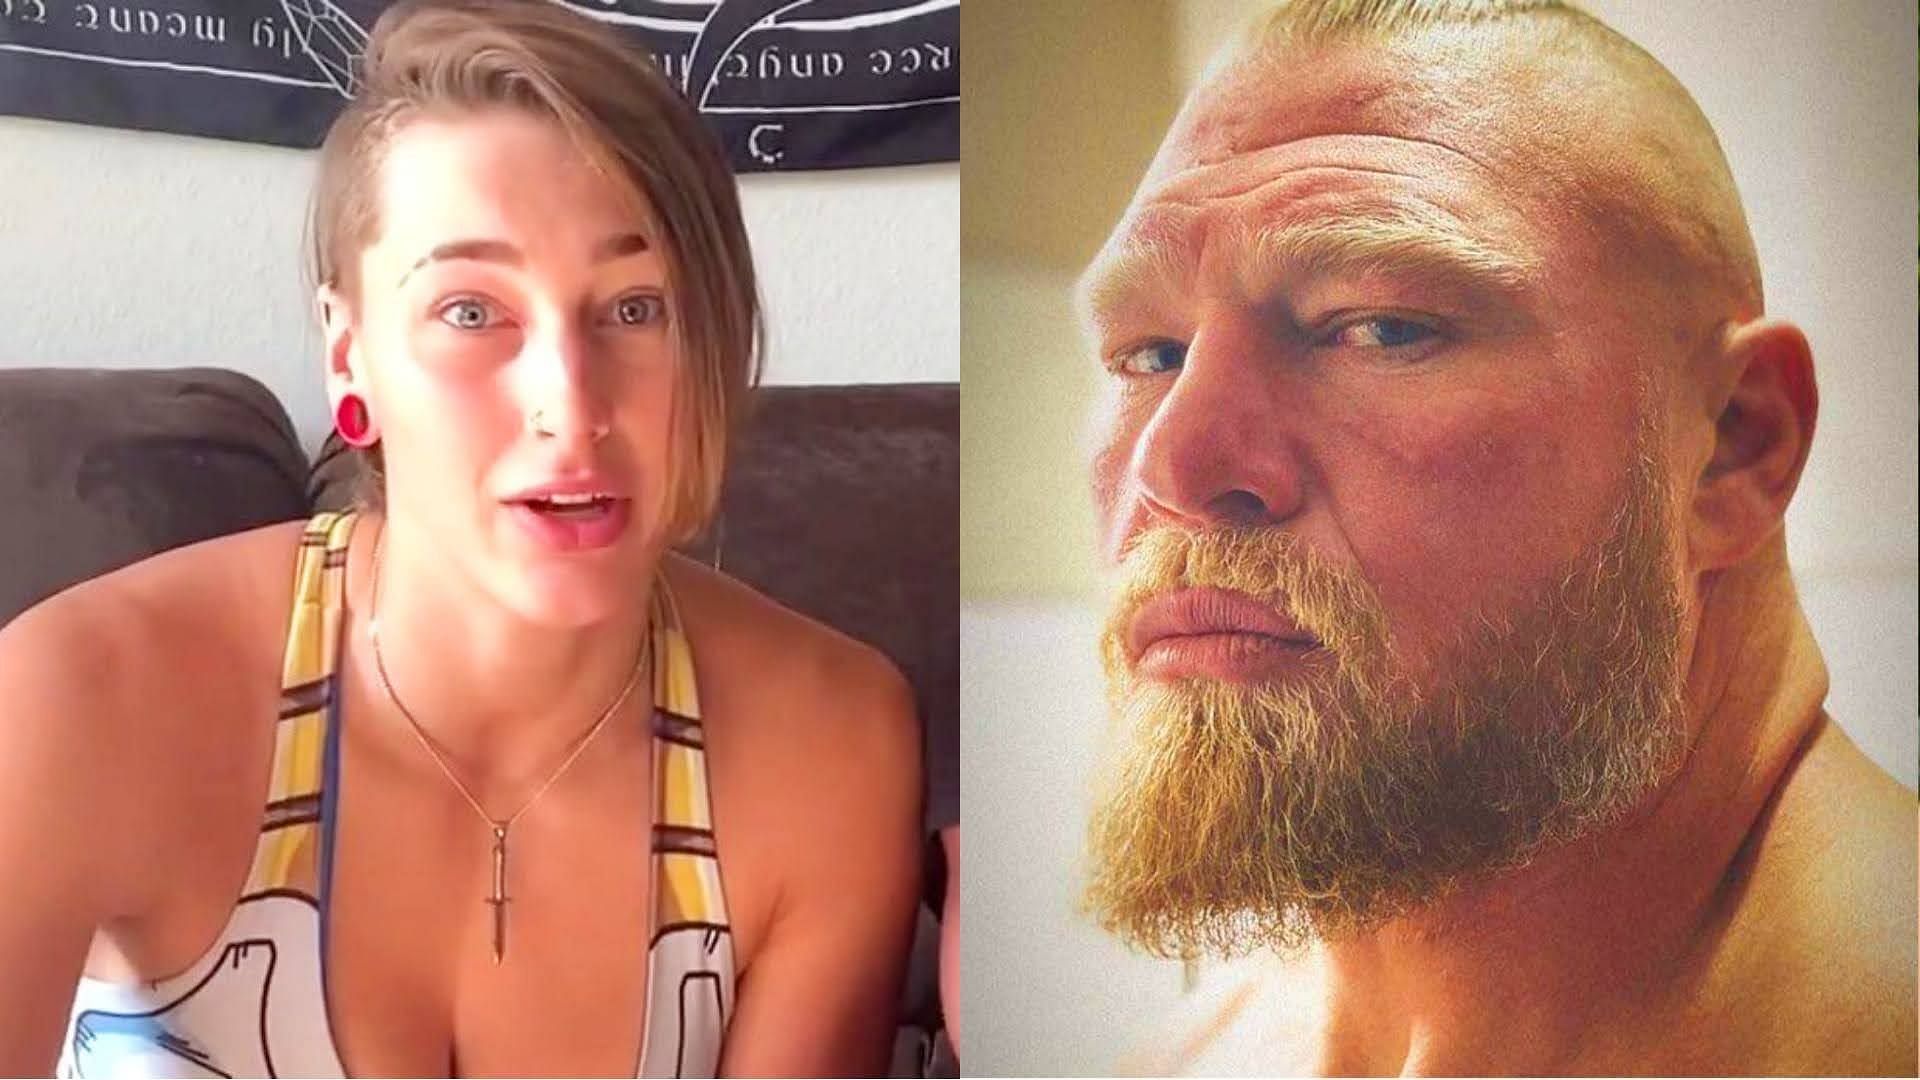 Top WWE Superstars Rhea Ripley (left) and Brock Lesnar (right)